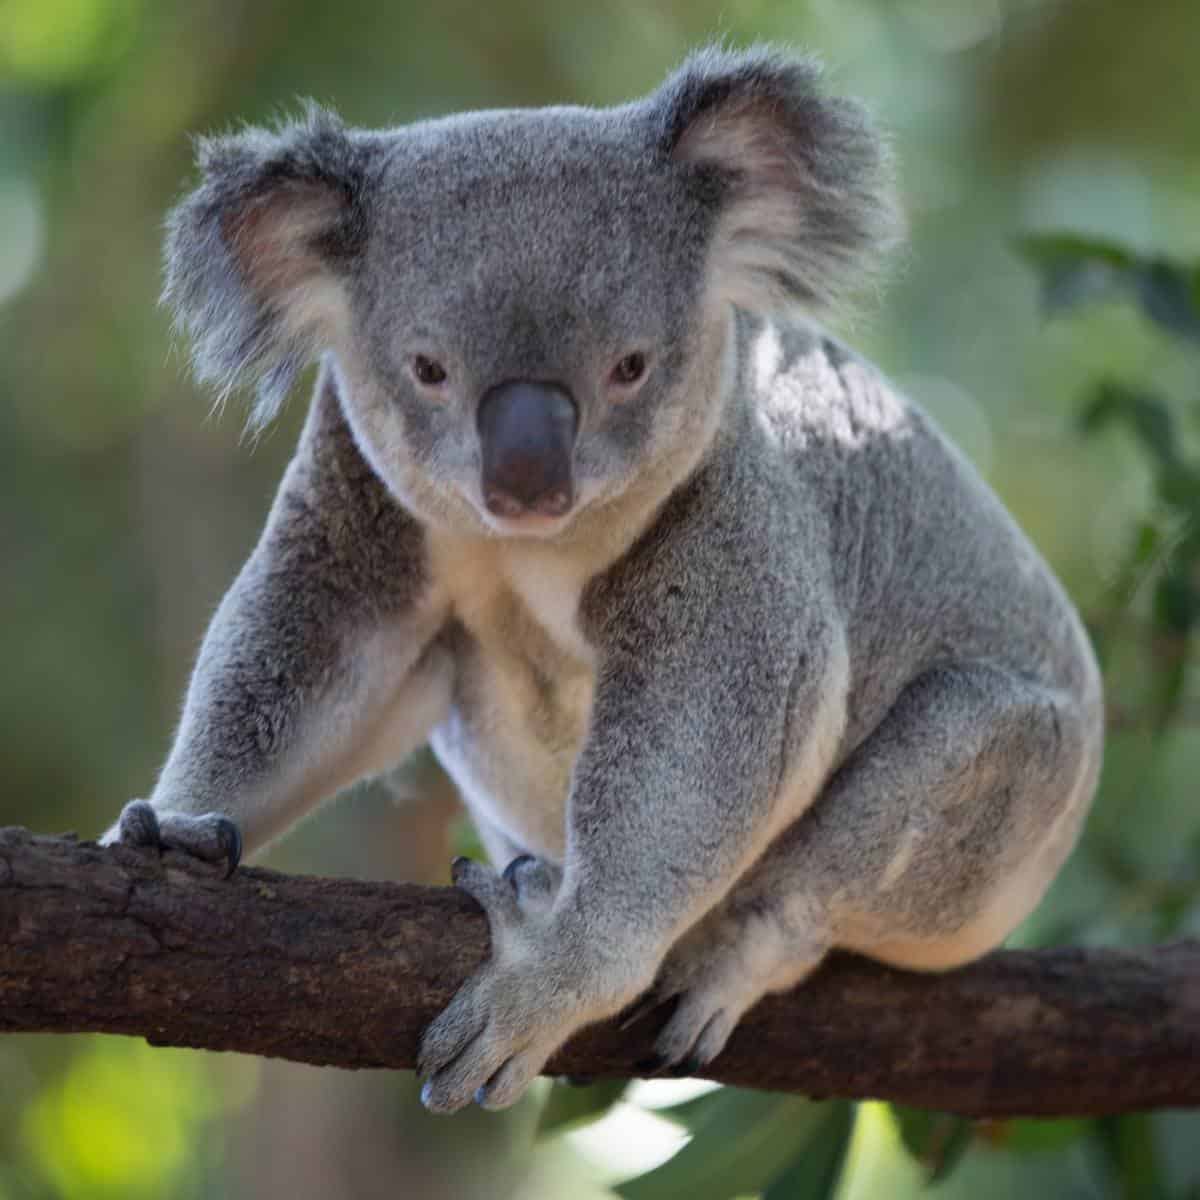 Koala on a branch in the forest.